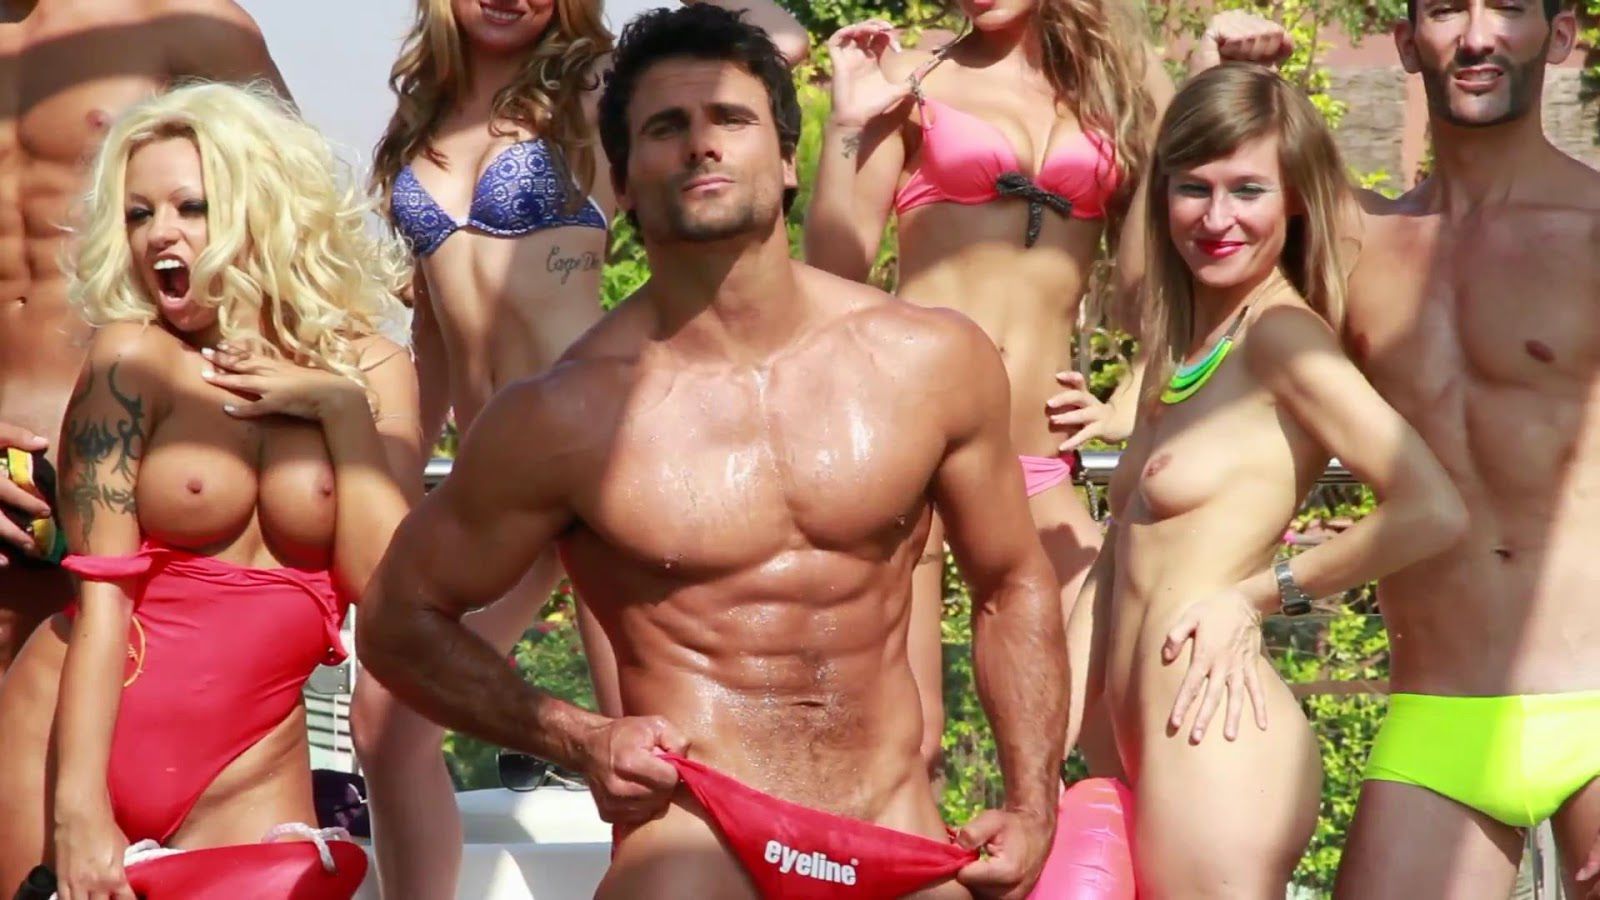 Jeremy jackson (baywatch star) naked - full frontal videos and pictures.